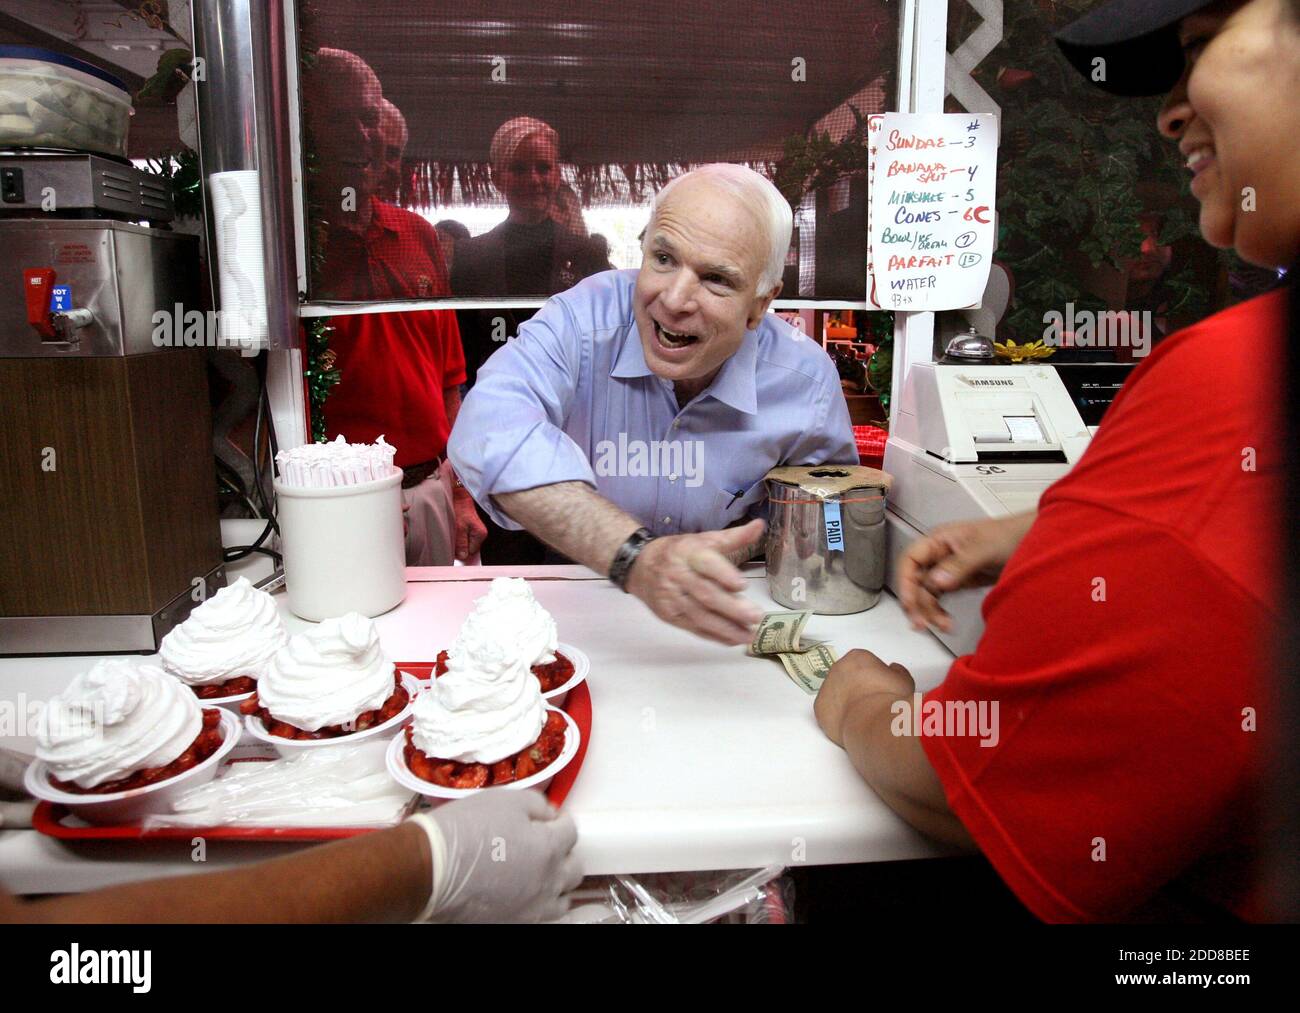 NO FILM, NO VIDEO, NO TV, NO DOCUMENTARY - GOP presidential candidate Arizona Senator John McCain leans through a window at the order counter at Parkesdale Farm Market roadside stand, for some strawberry shortcake, in Plant City, Florida, USA on Thursday, October 23, 2008, during his bus tour across Central Florida. Photo by Joe Burbank/Orlando Sentinel/MCT/ABACAPRESS.COM Stock Photo